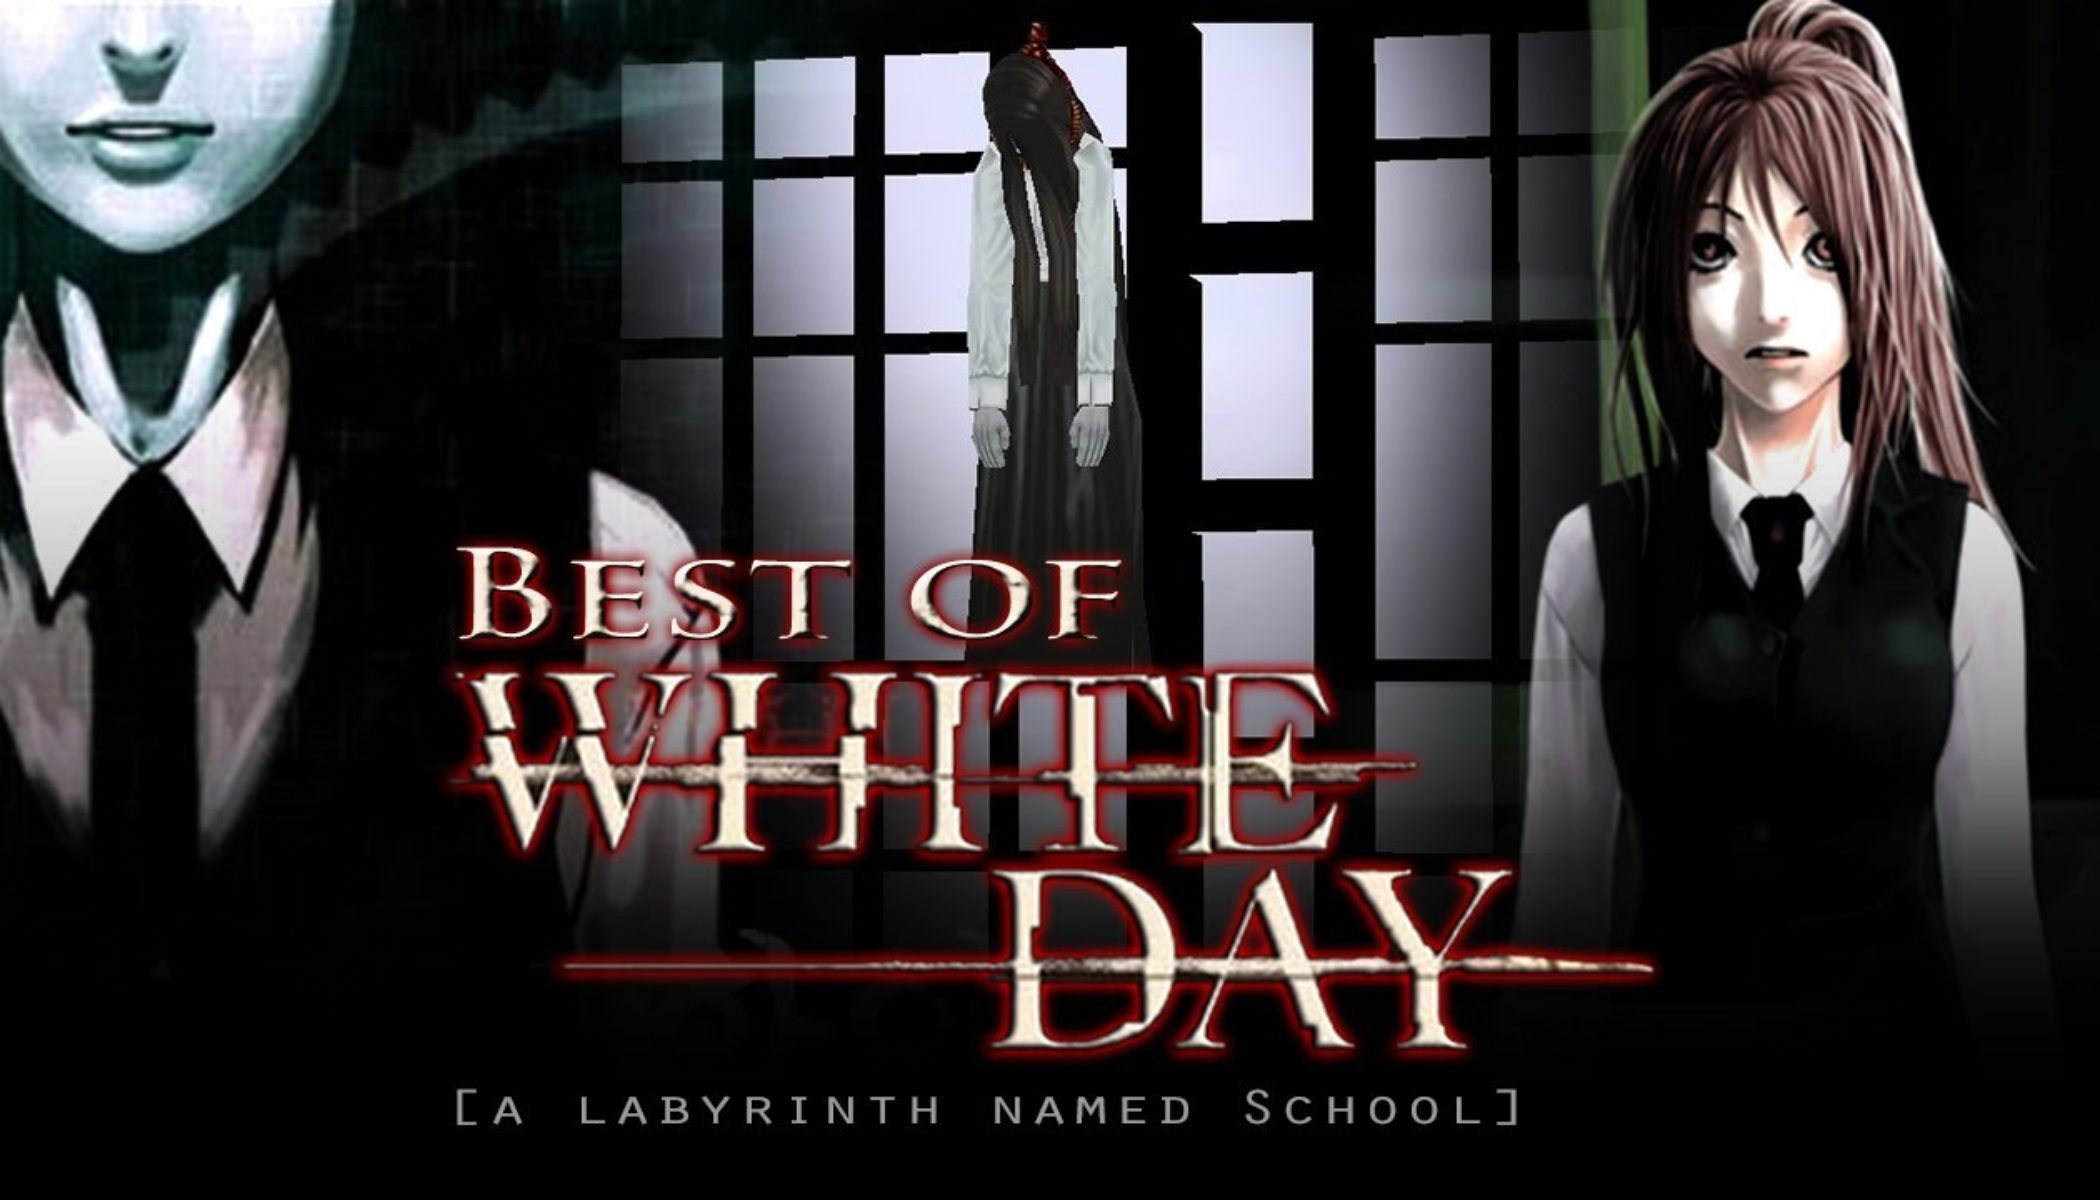 Хоррор игра про школу. White Day игра 2001. White Day a Labyrinth named School 2001. White Day - Ultimate Horror Edition. White Day: a Labyrinth named School (2015 Video game).